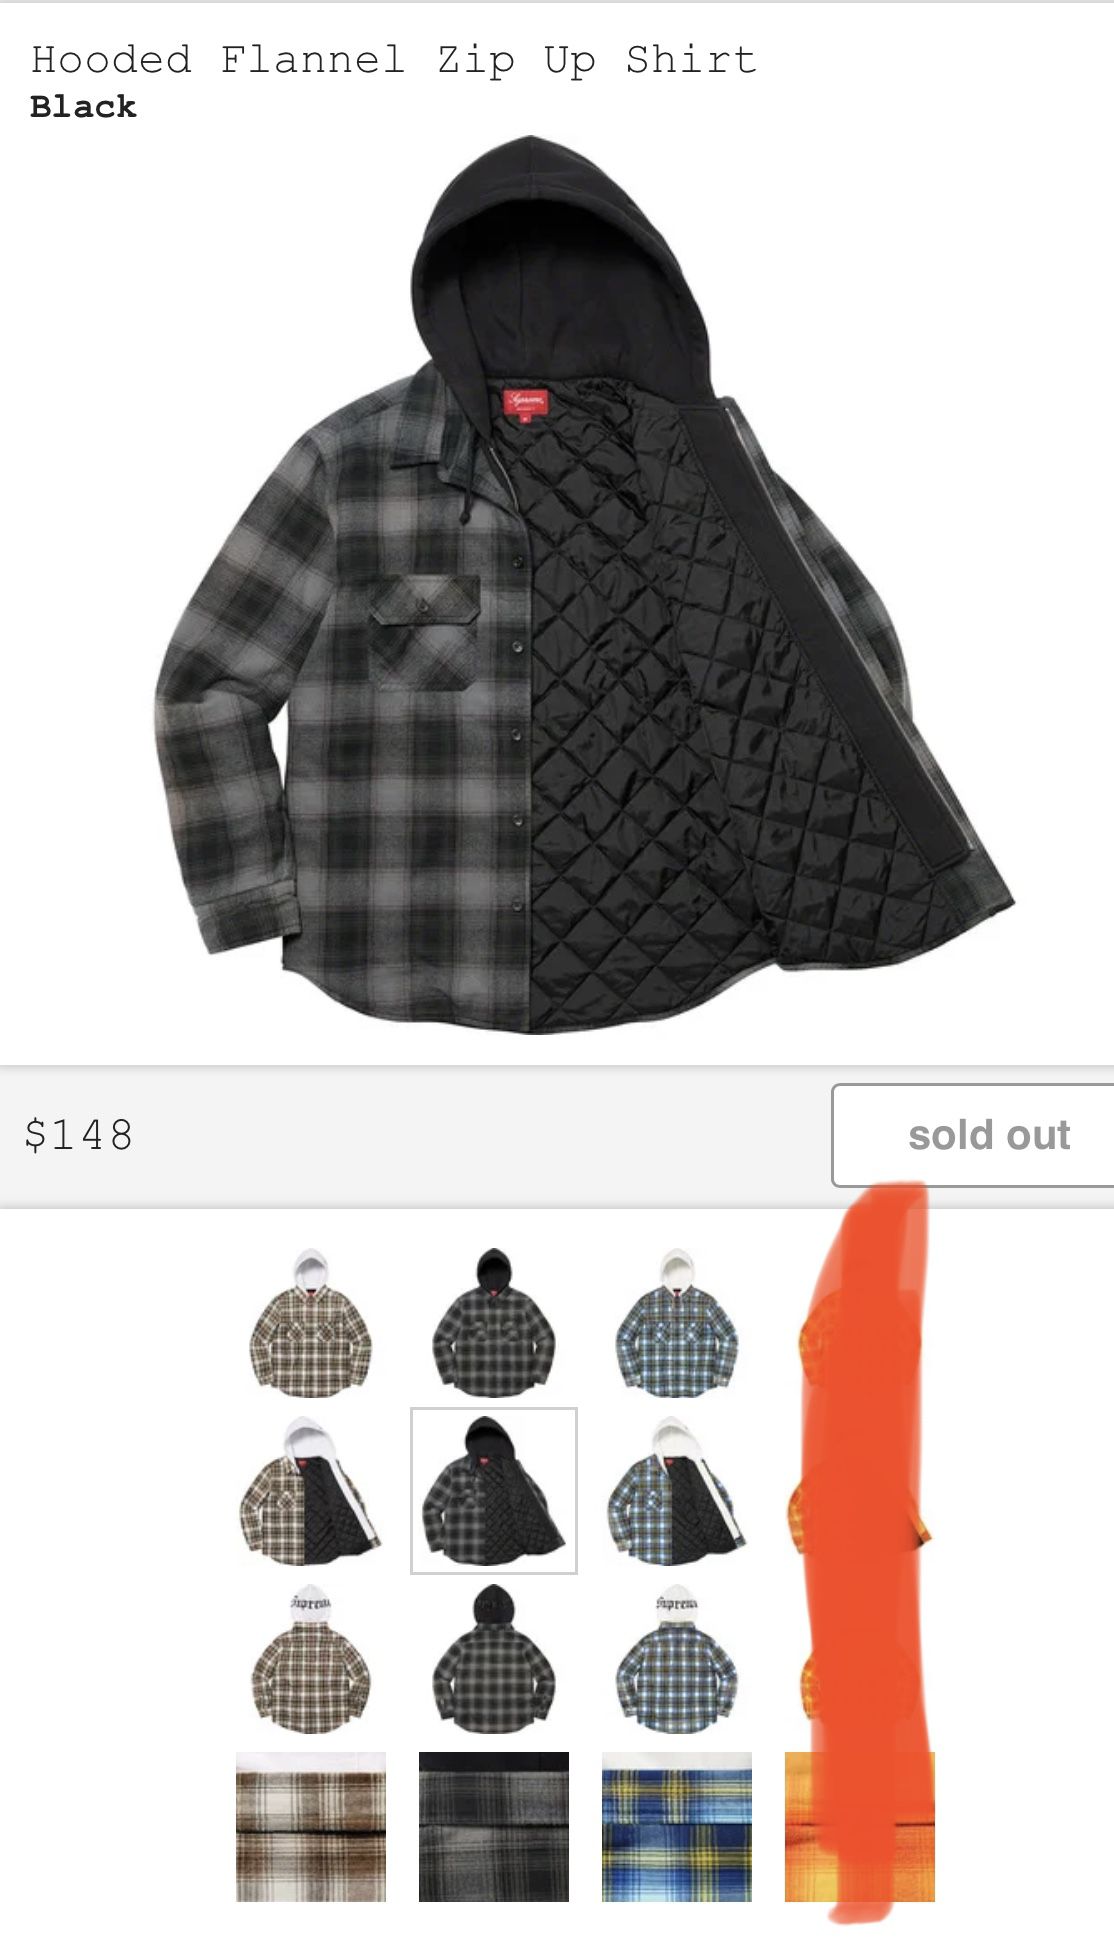 LOOKING TO BUY: Supreme Hooded Flannel Zip Up Shirt